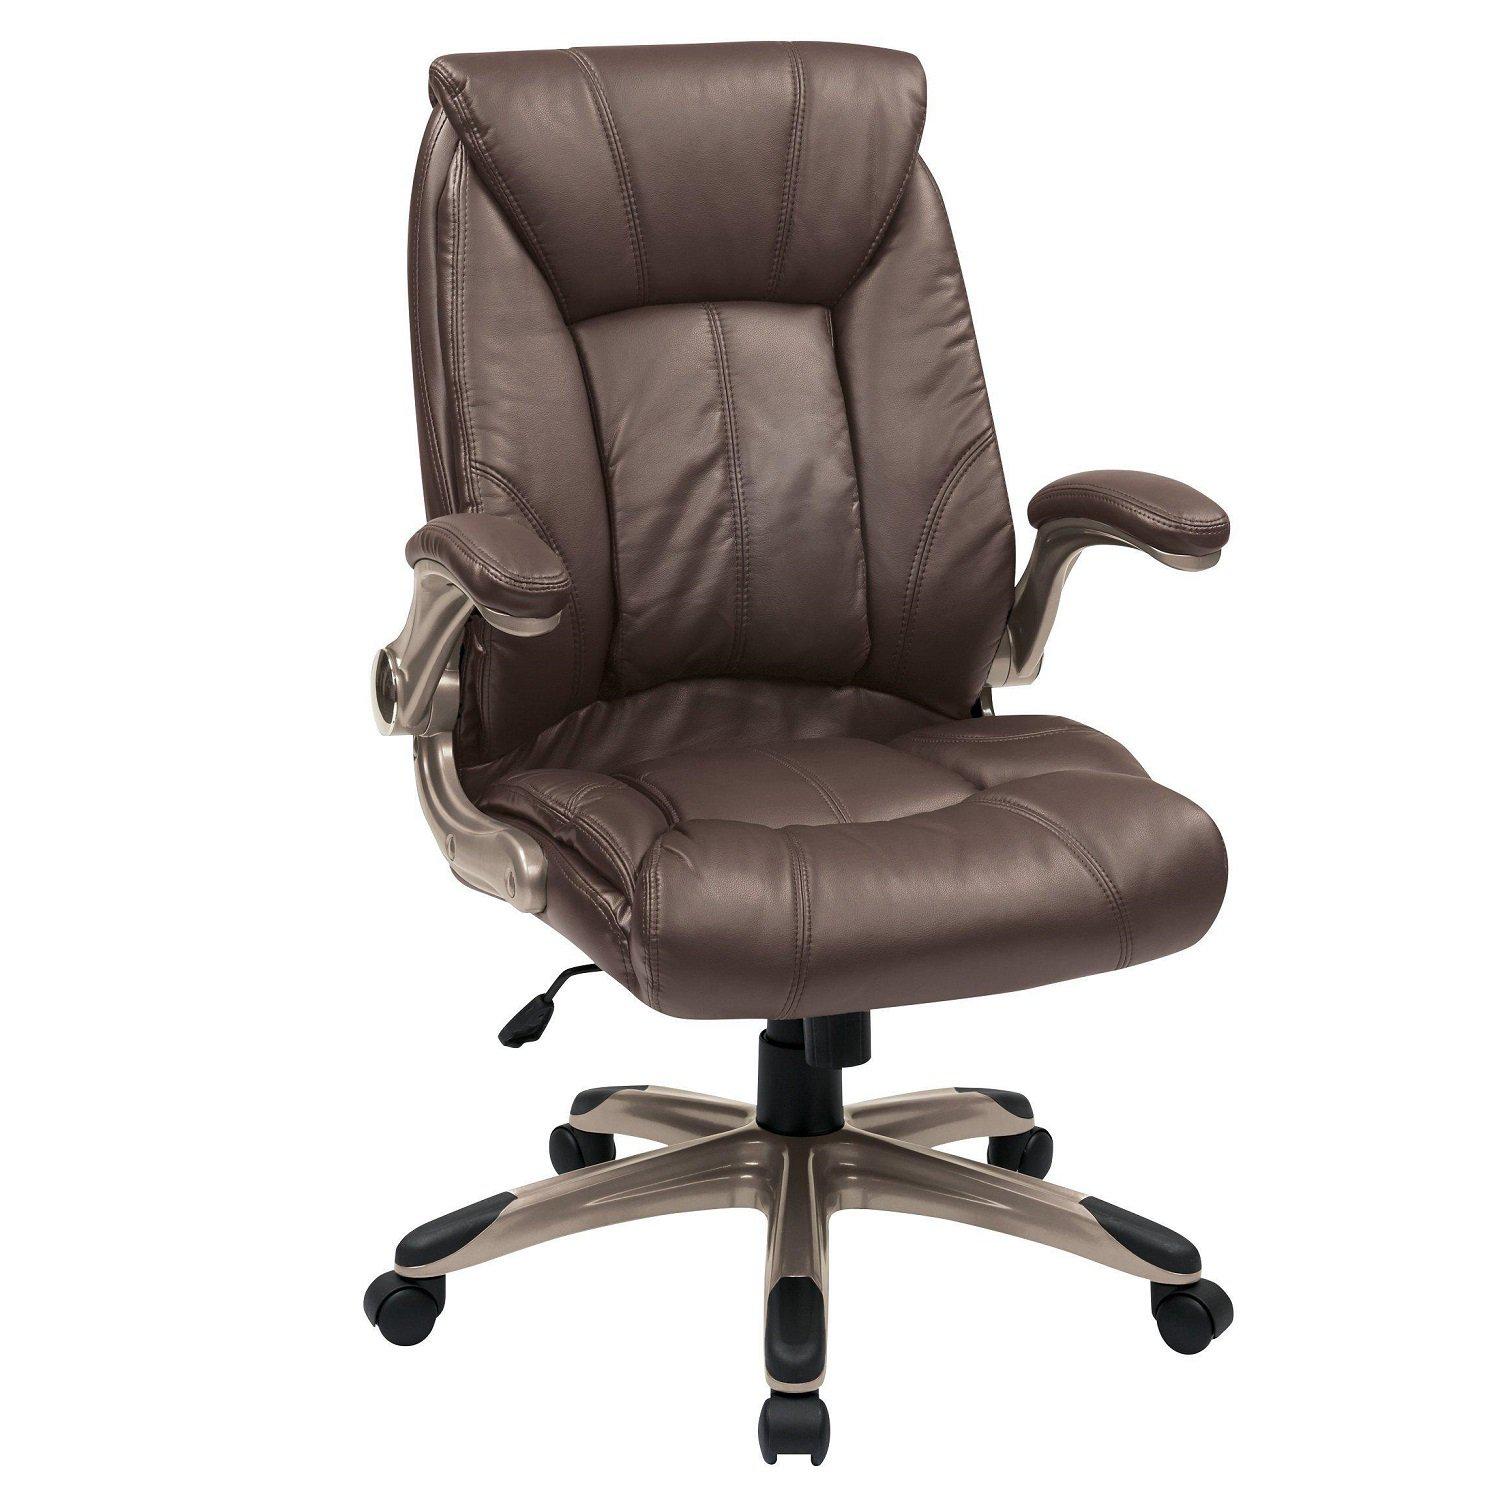 Faux Leather Mid-Back Manager's Chair